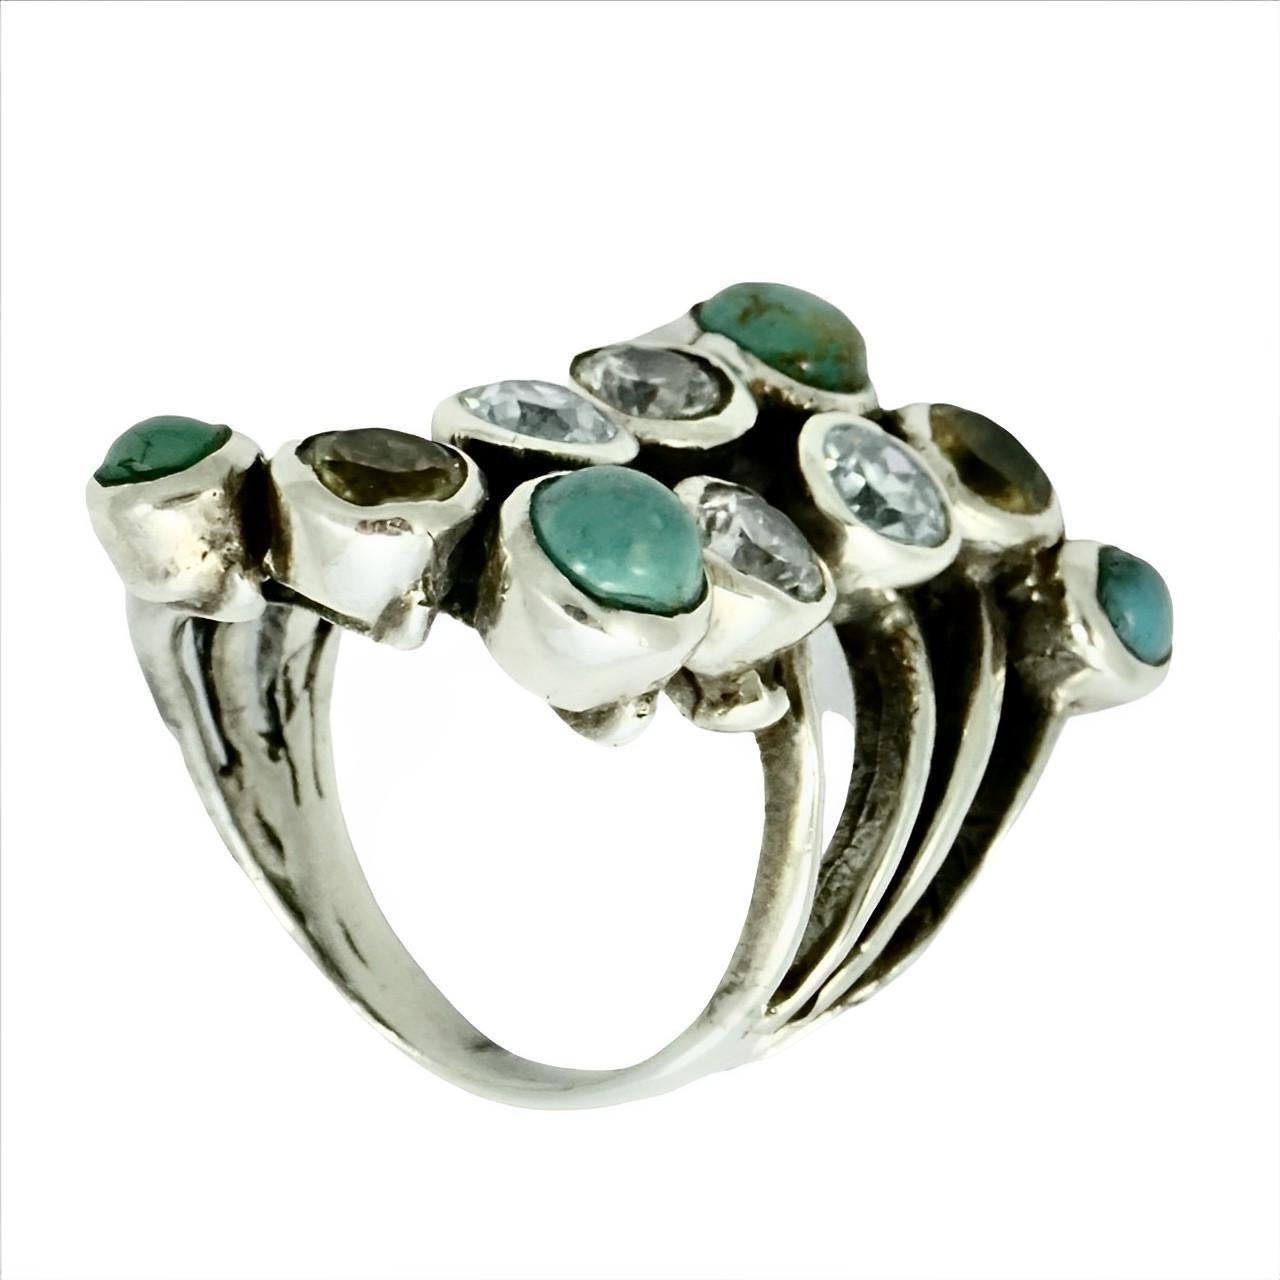 
Wonderful sterling silver ring set with turquoise, citrine, topaz and clear crystal stones. Ring size UK N 1/2, US 6 3/4, and measuring inside diameter approximately 1.8 cm / .7 inch. The front is approximately length 4 cm / 1.57 inches. The silver